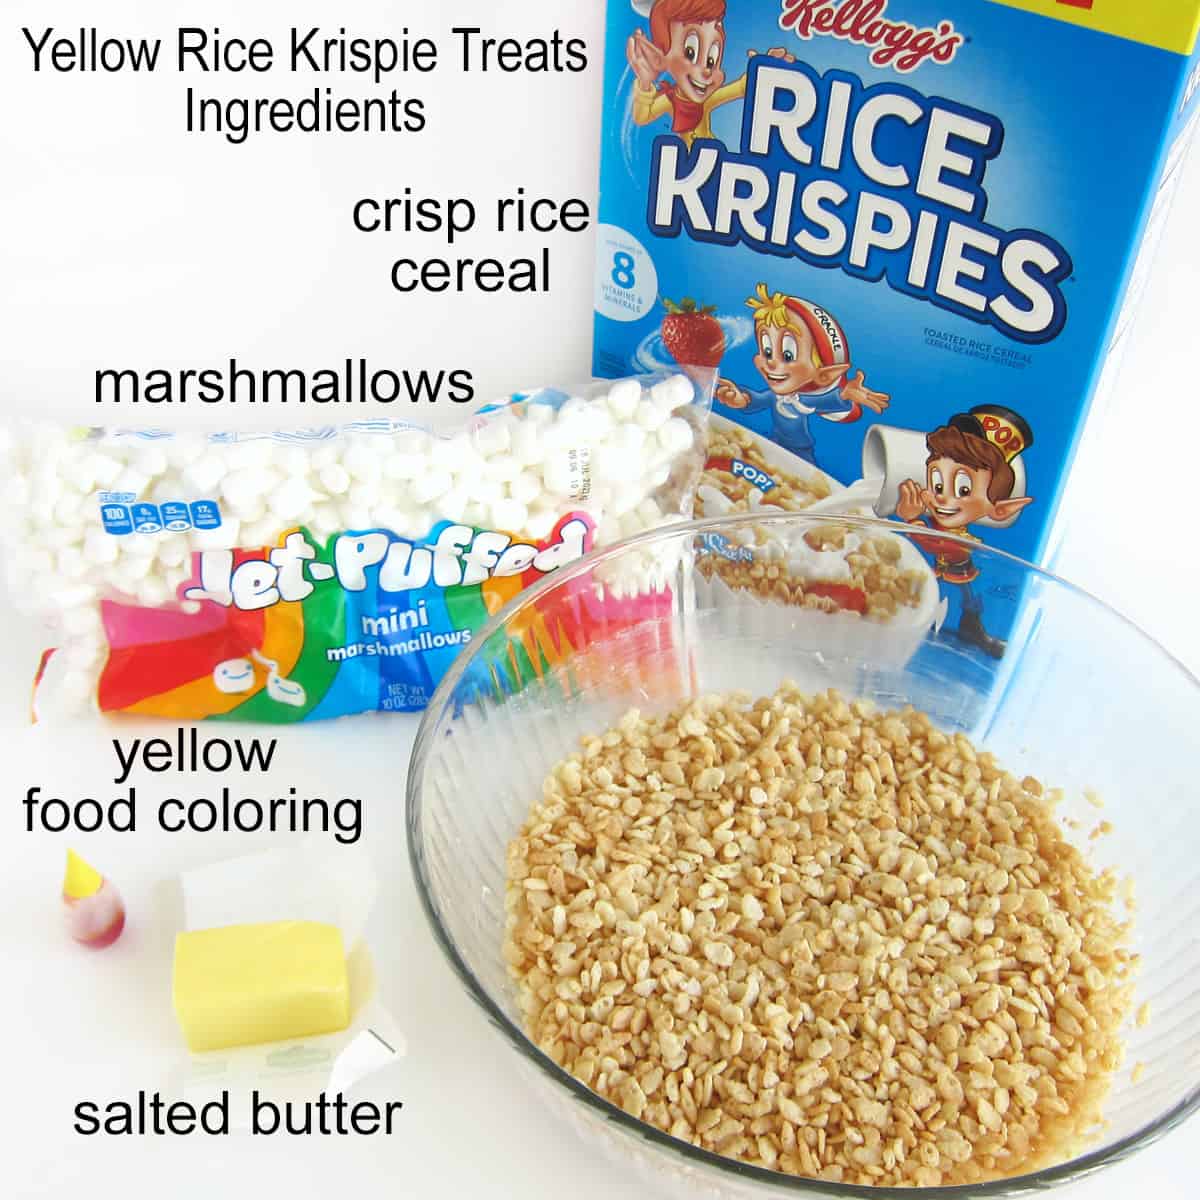 yellow Rice Krispie treats ingredients including cereal, marshmallows, butter, and yellow food coloring